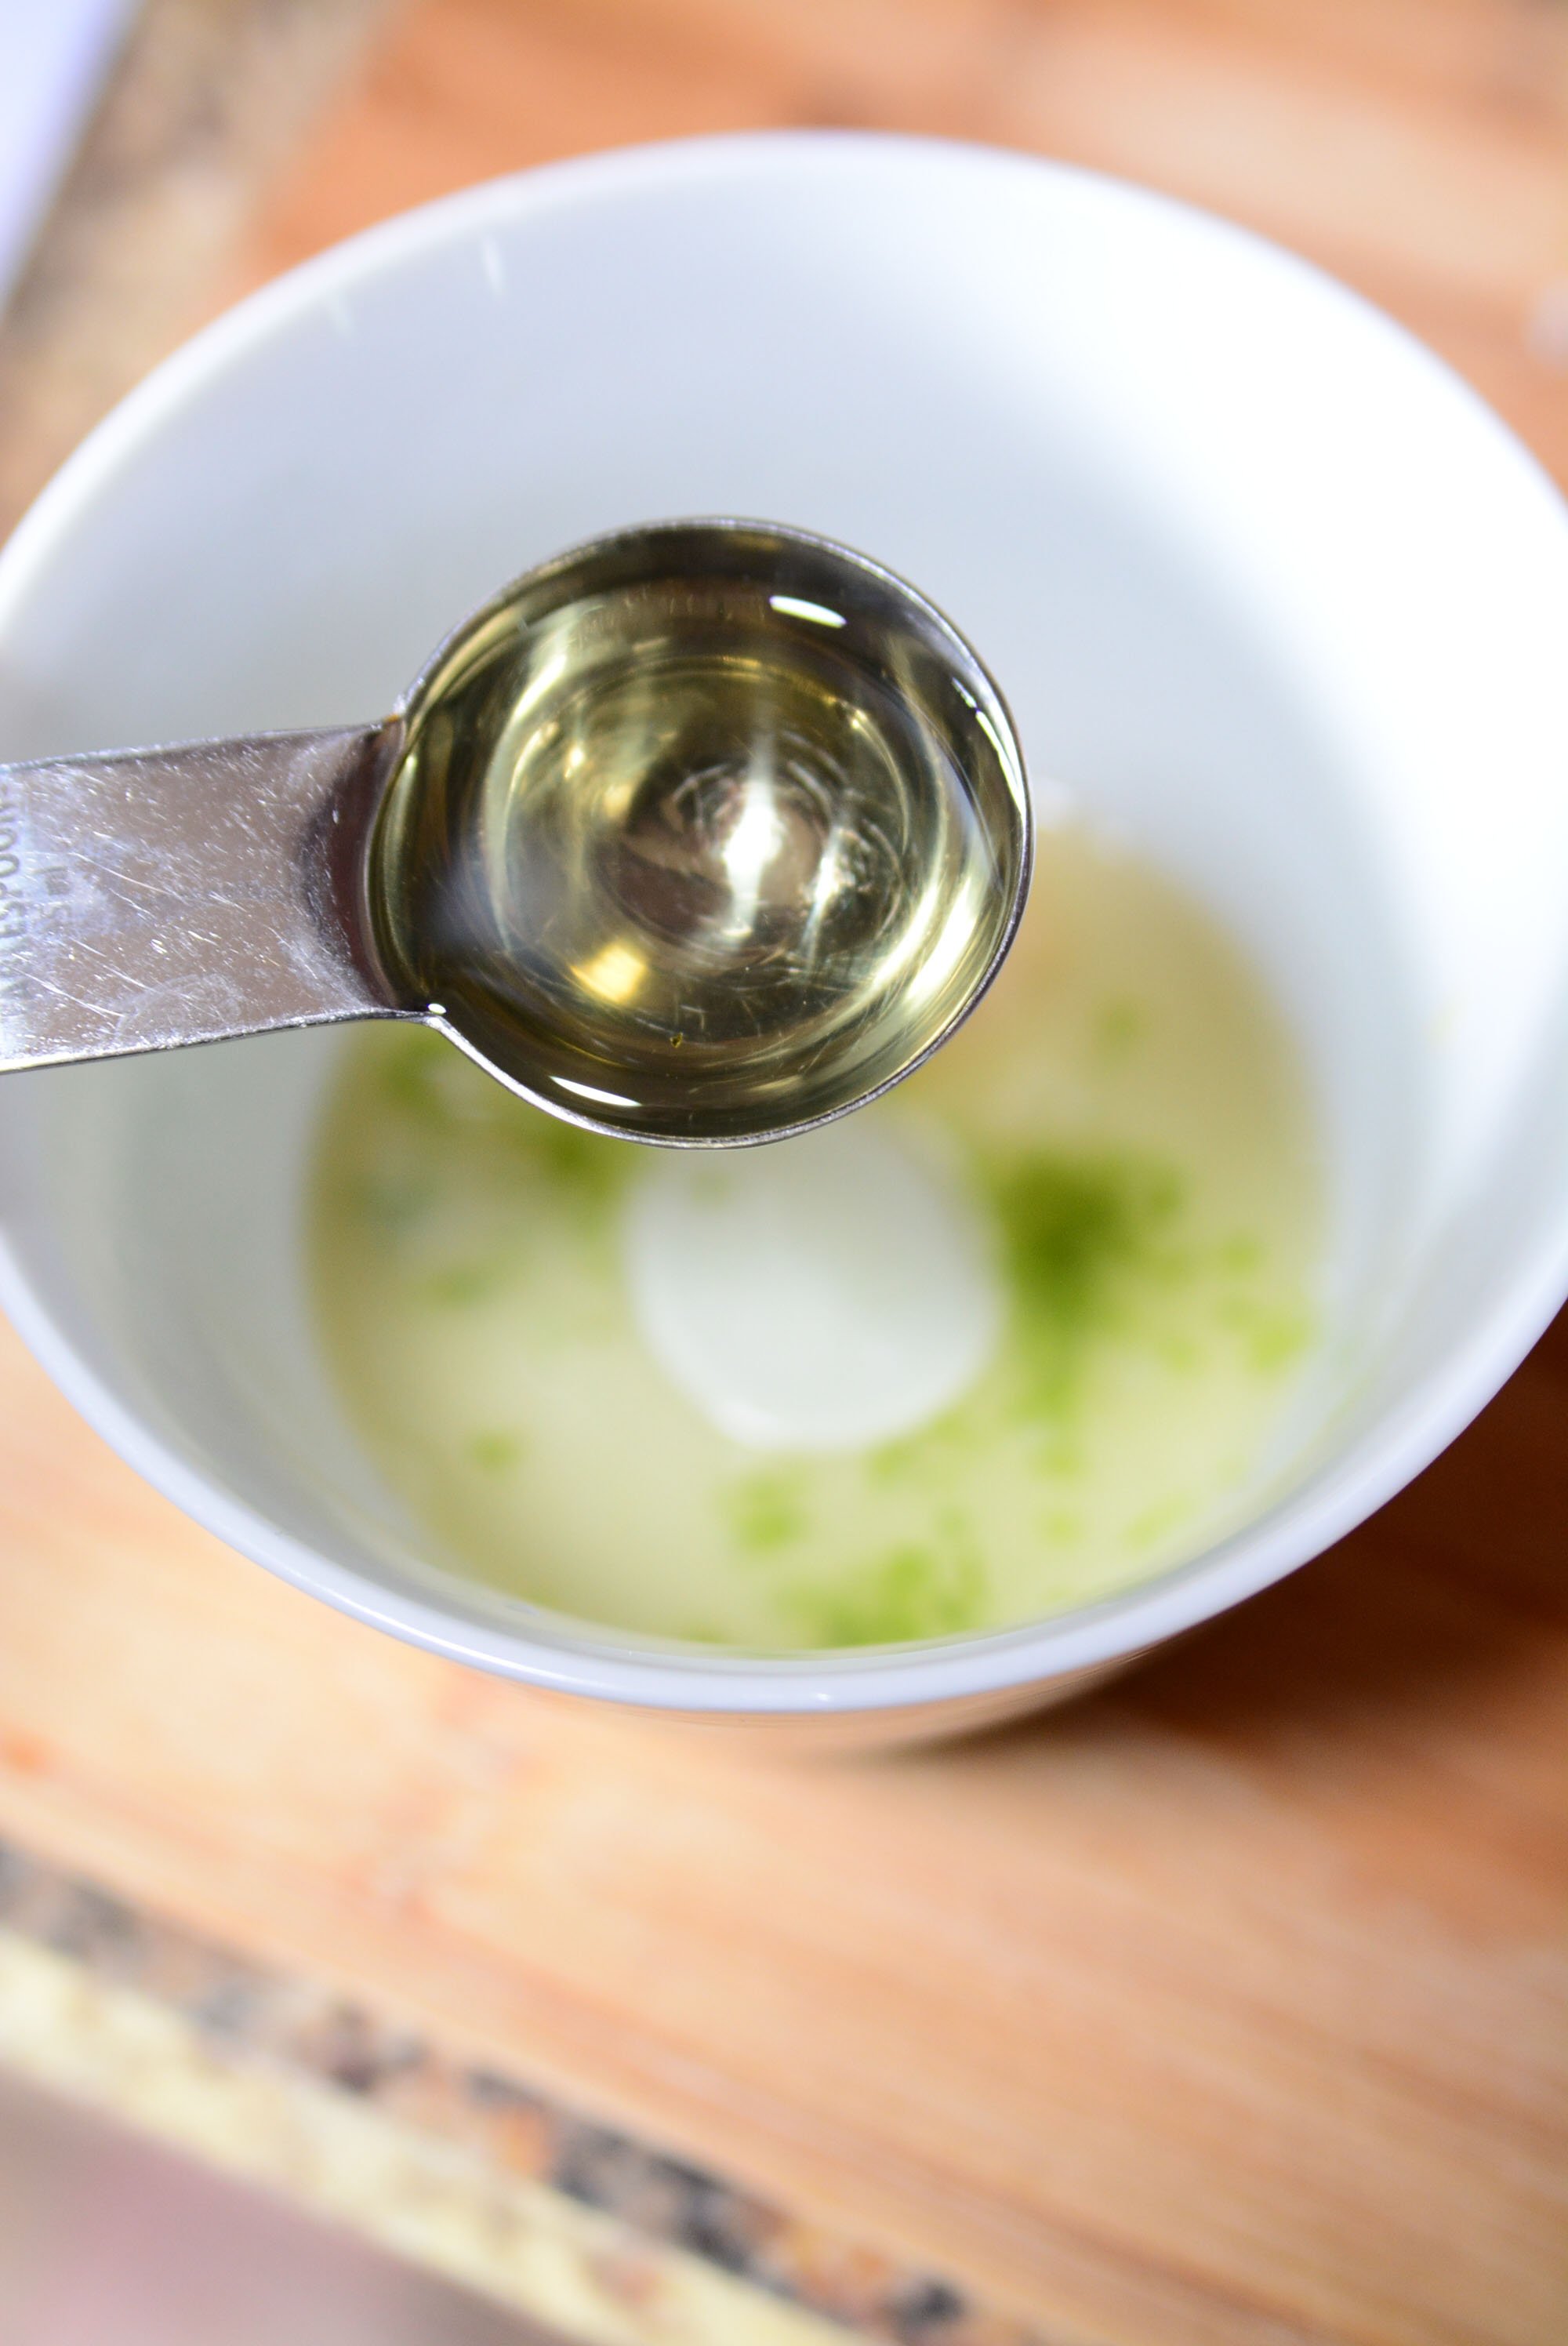 Making the dressing in a white bowl with lime juice in the bottom.